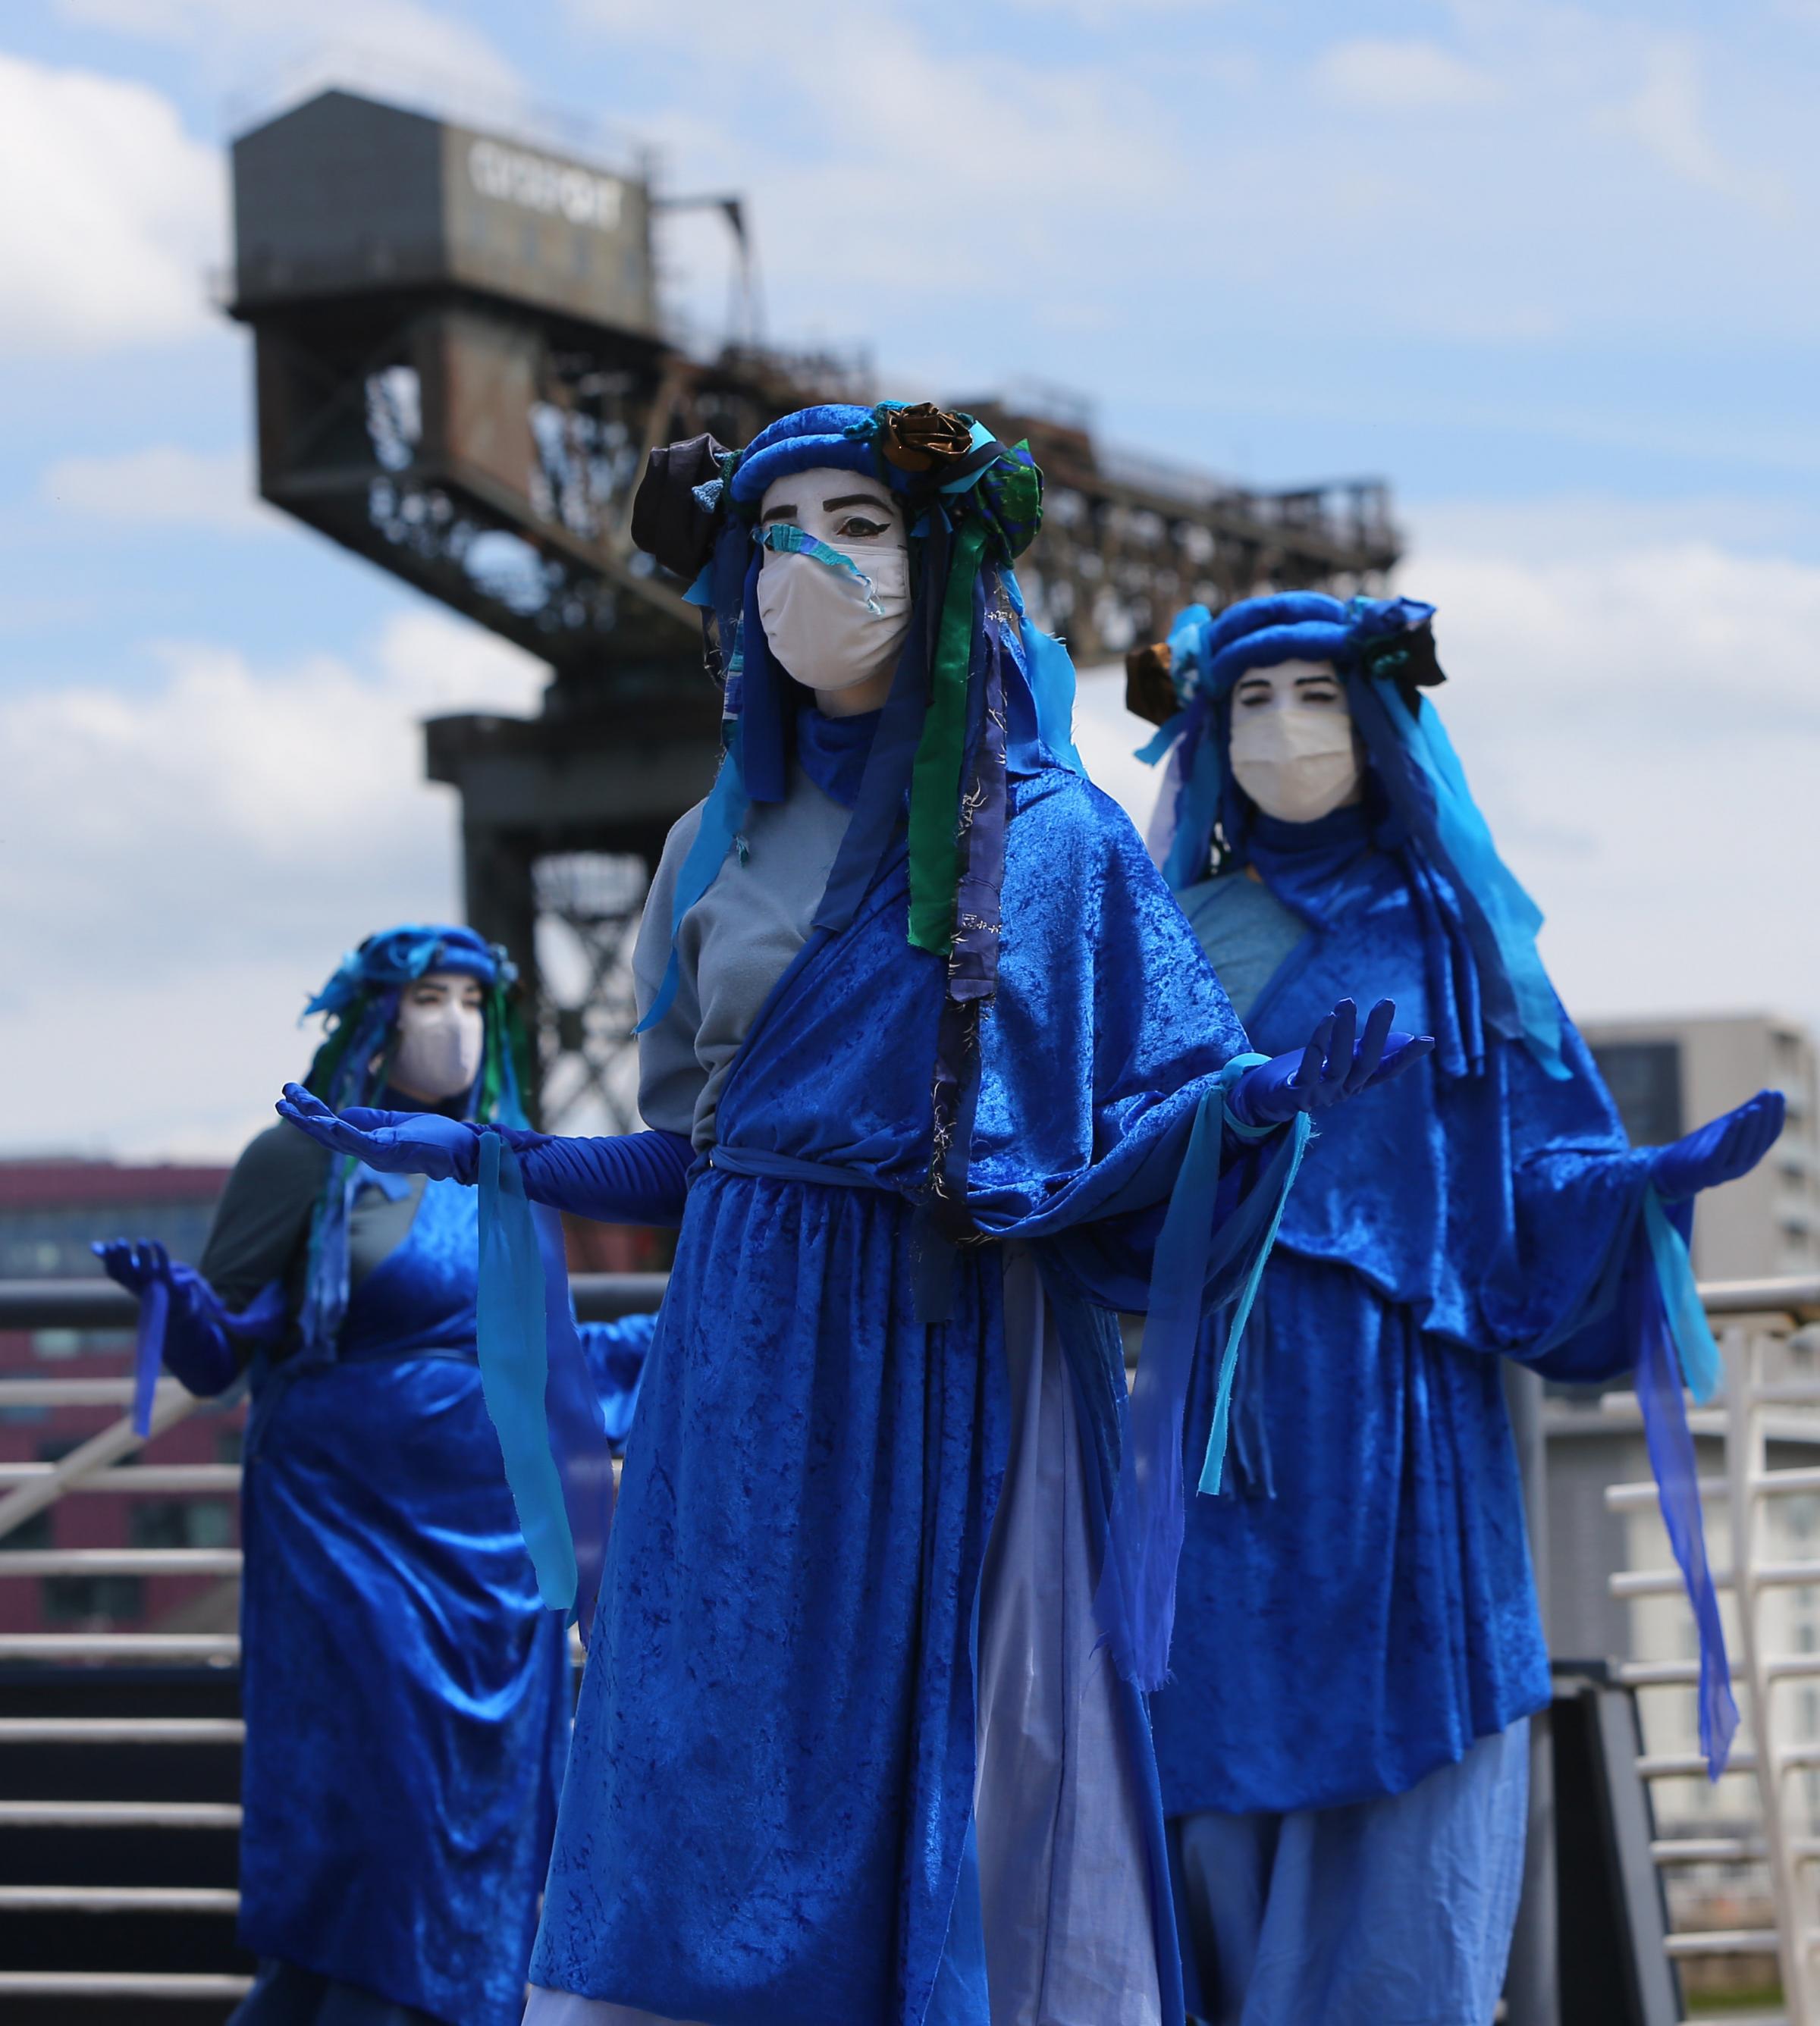 The Blue Rebels from Extinction Rebellion Scotland perform on Bells Bridge, Glasgow over the River Clyde to highlight sea level rise. COP 26 is due to take place at the SEC Campus in November. Photograph by Colin Mearns.